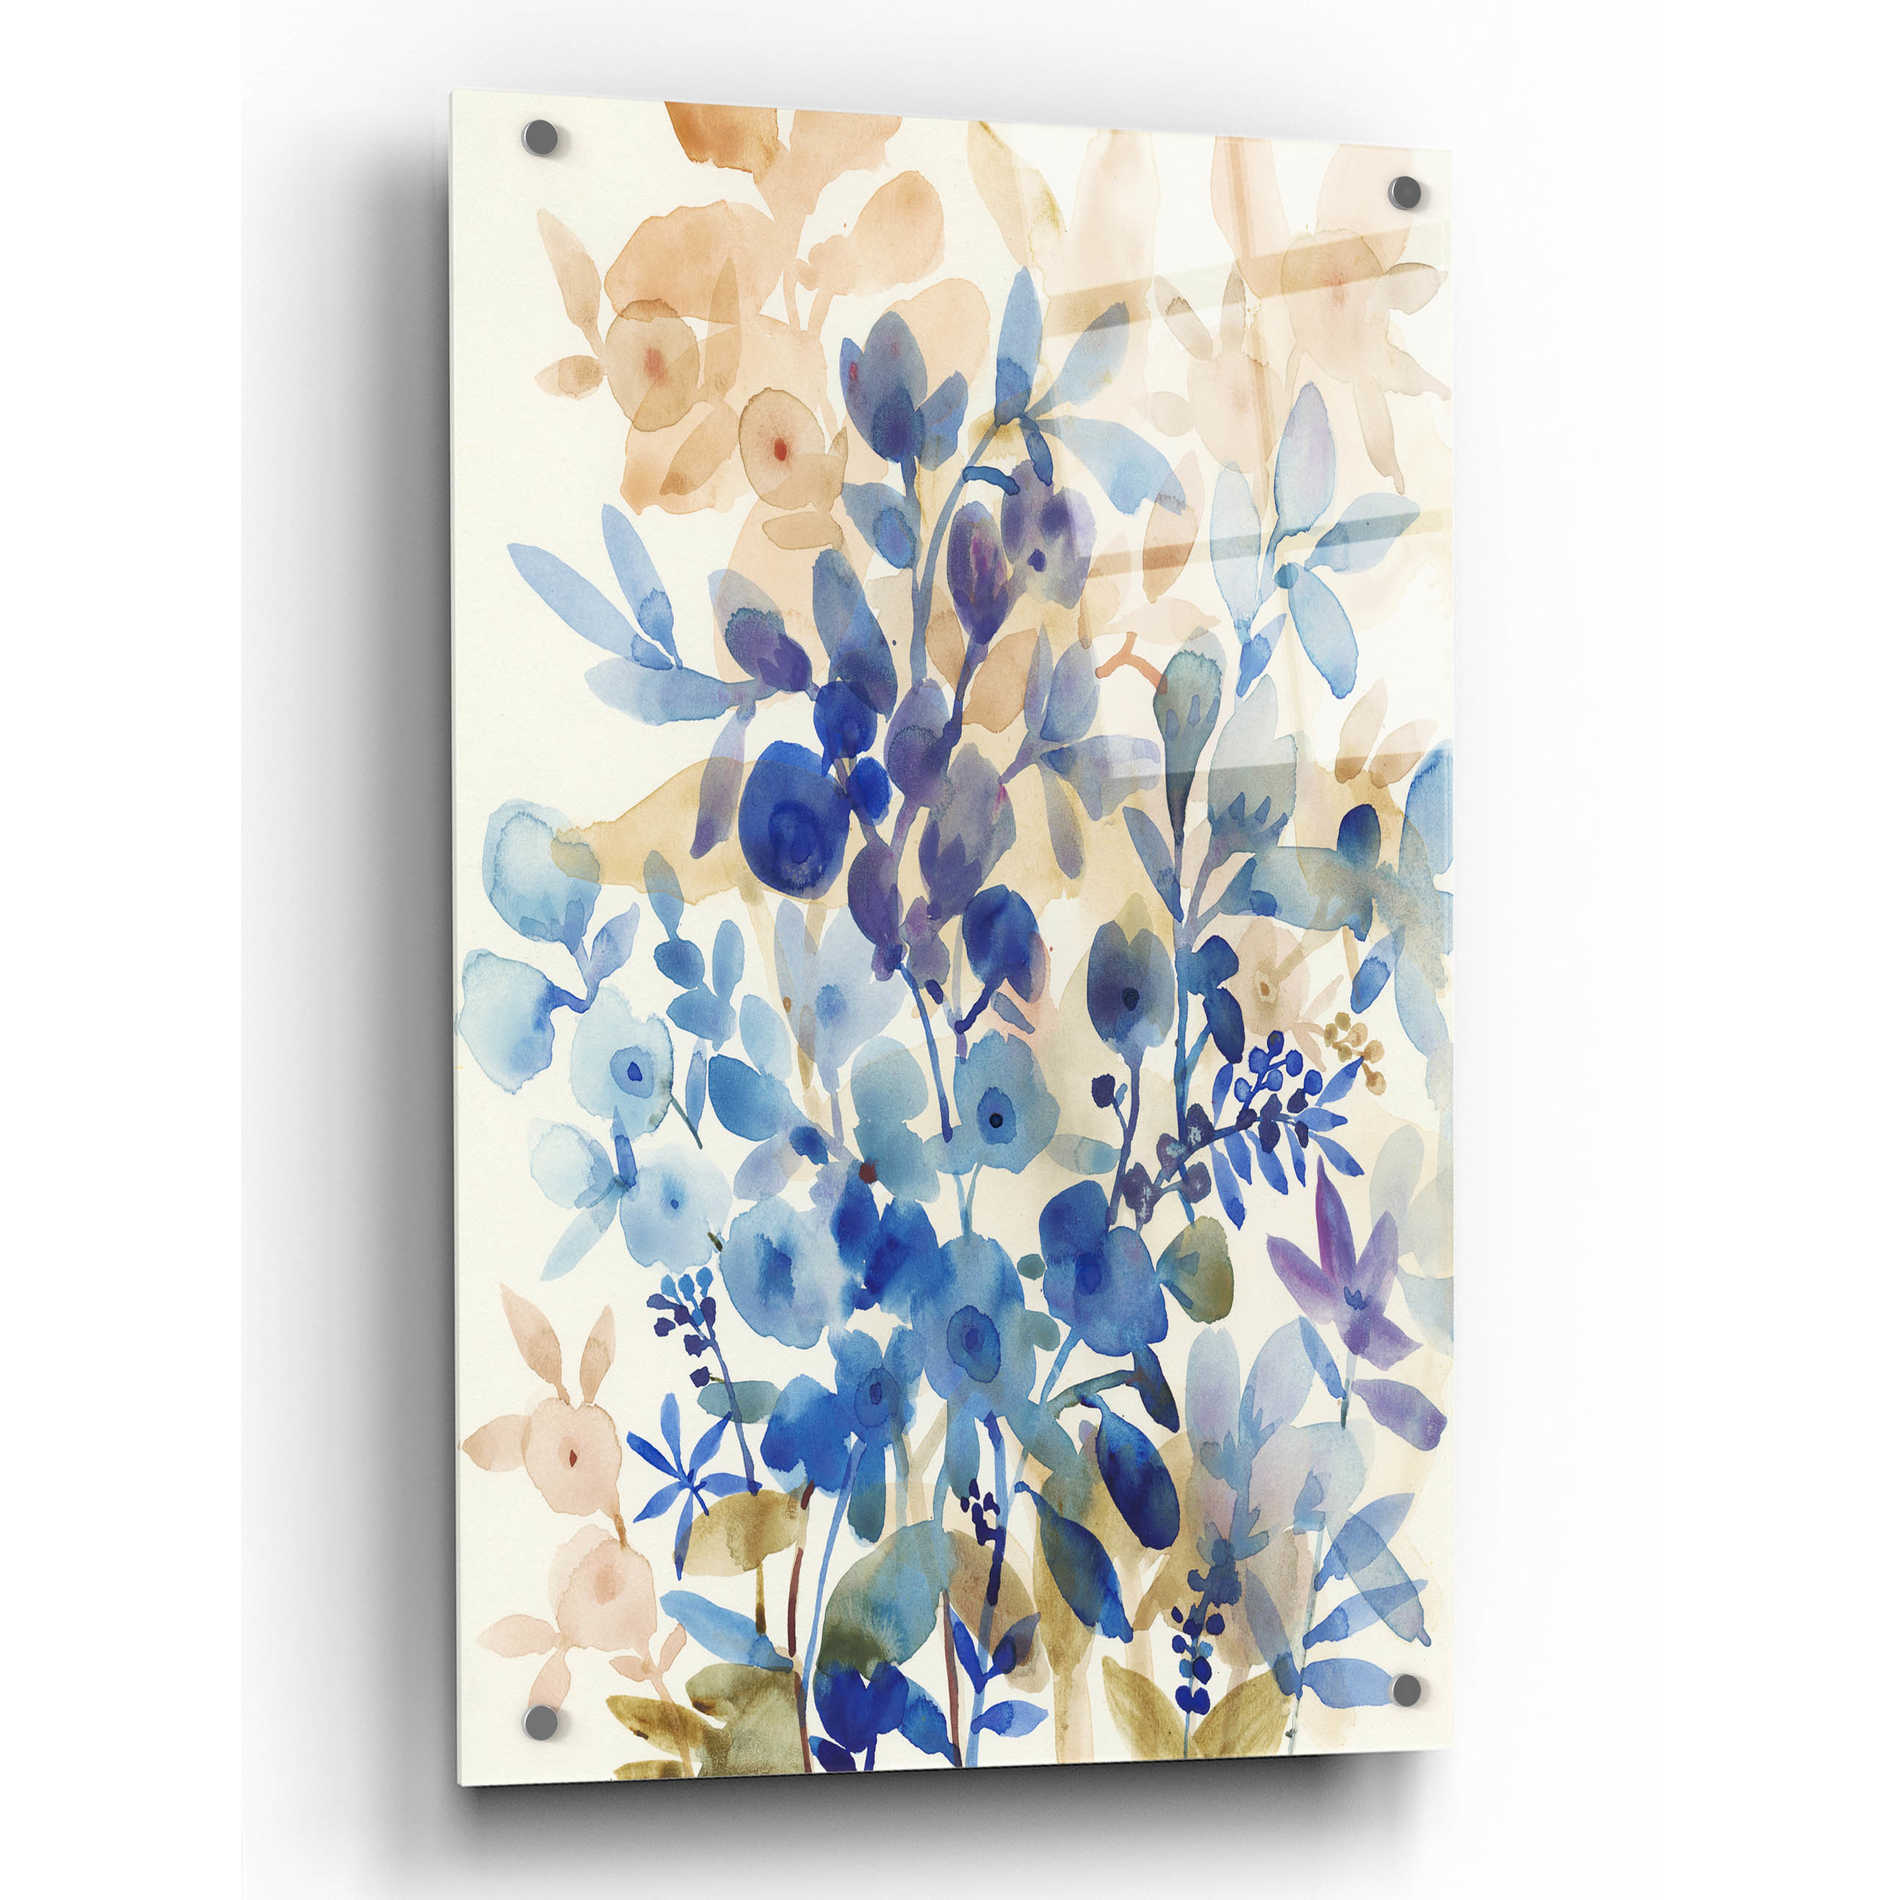 Epic Art 'Blueberry Floral I' by Tim O'Toole, Acrylic Glass Wall Art,24x36